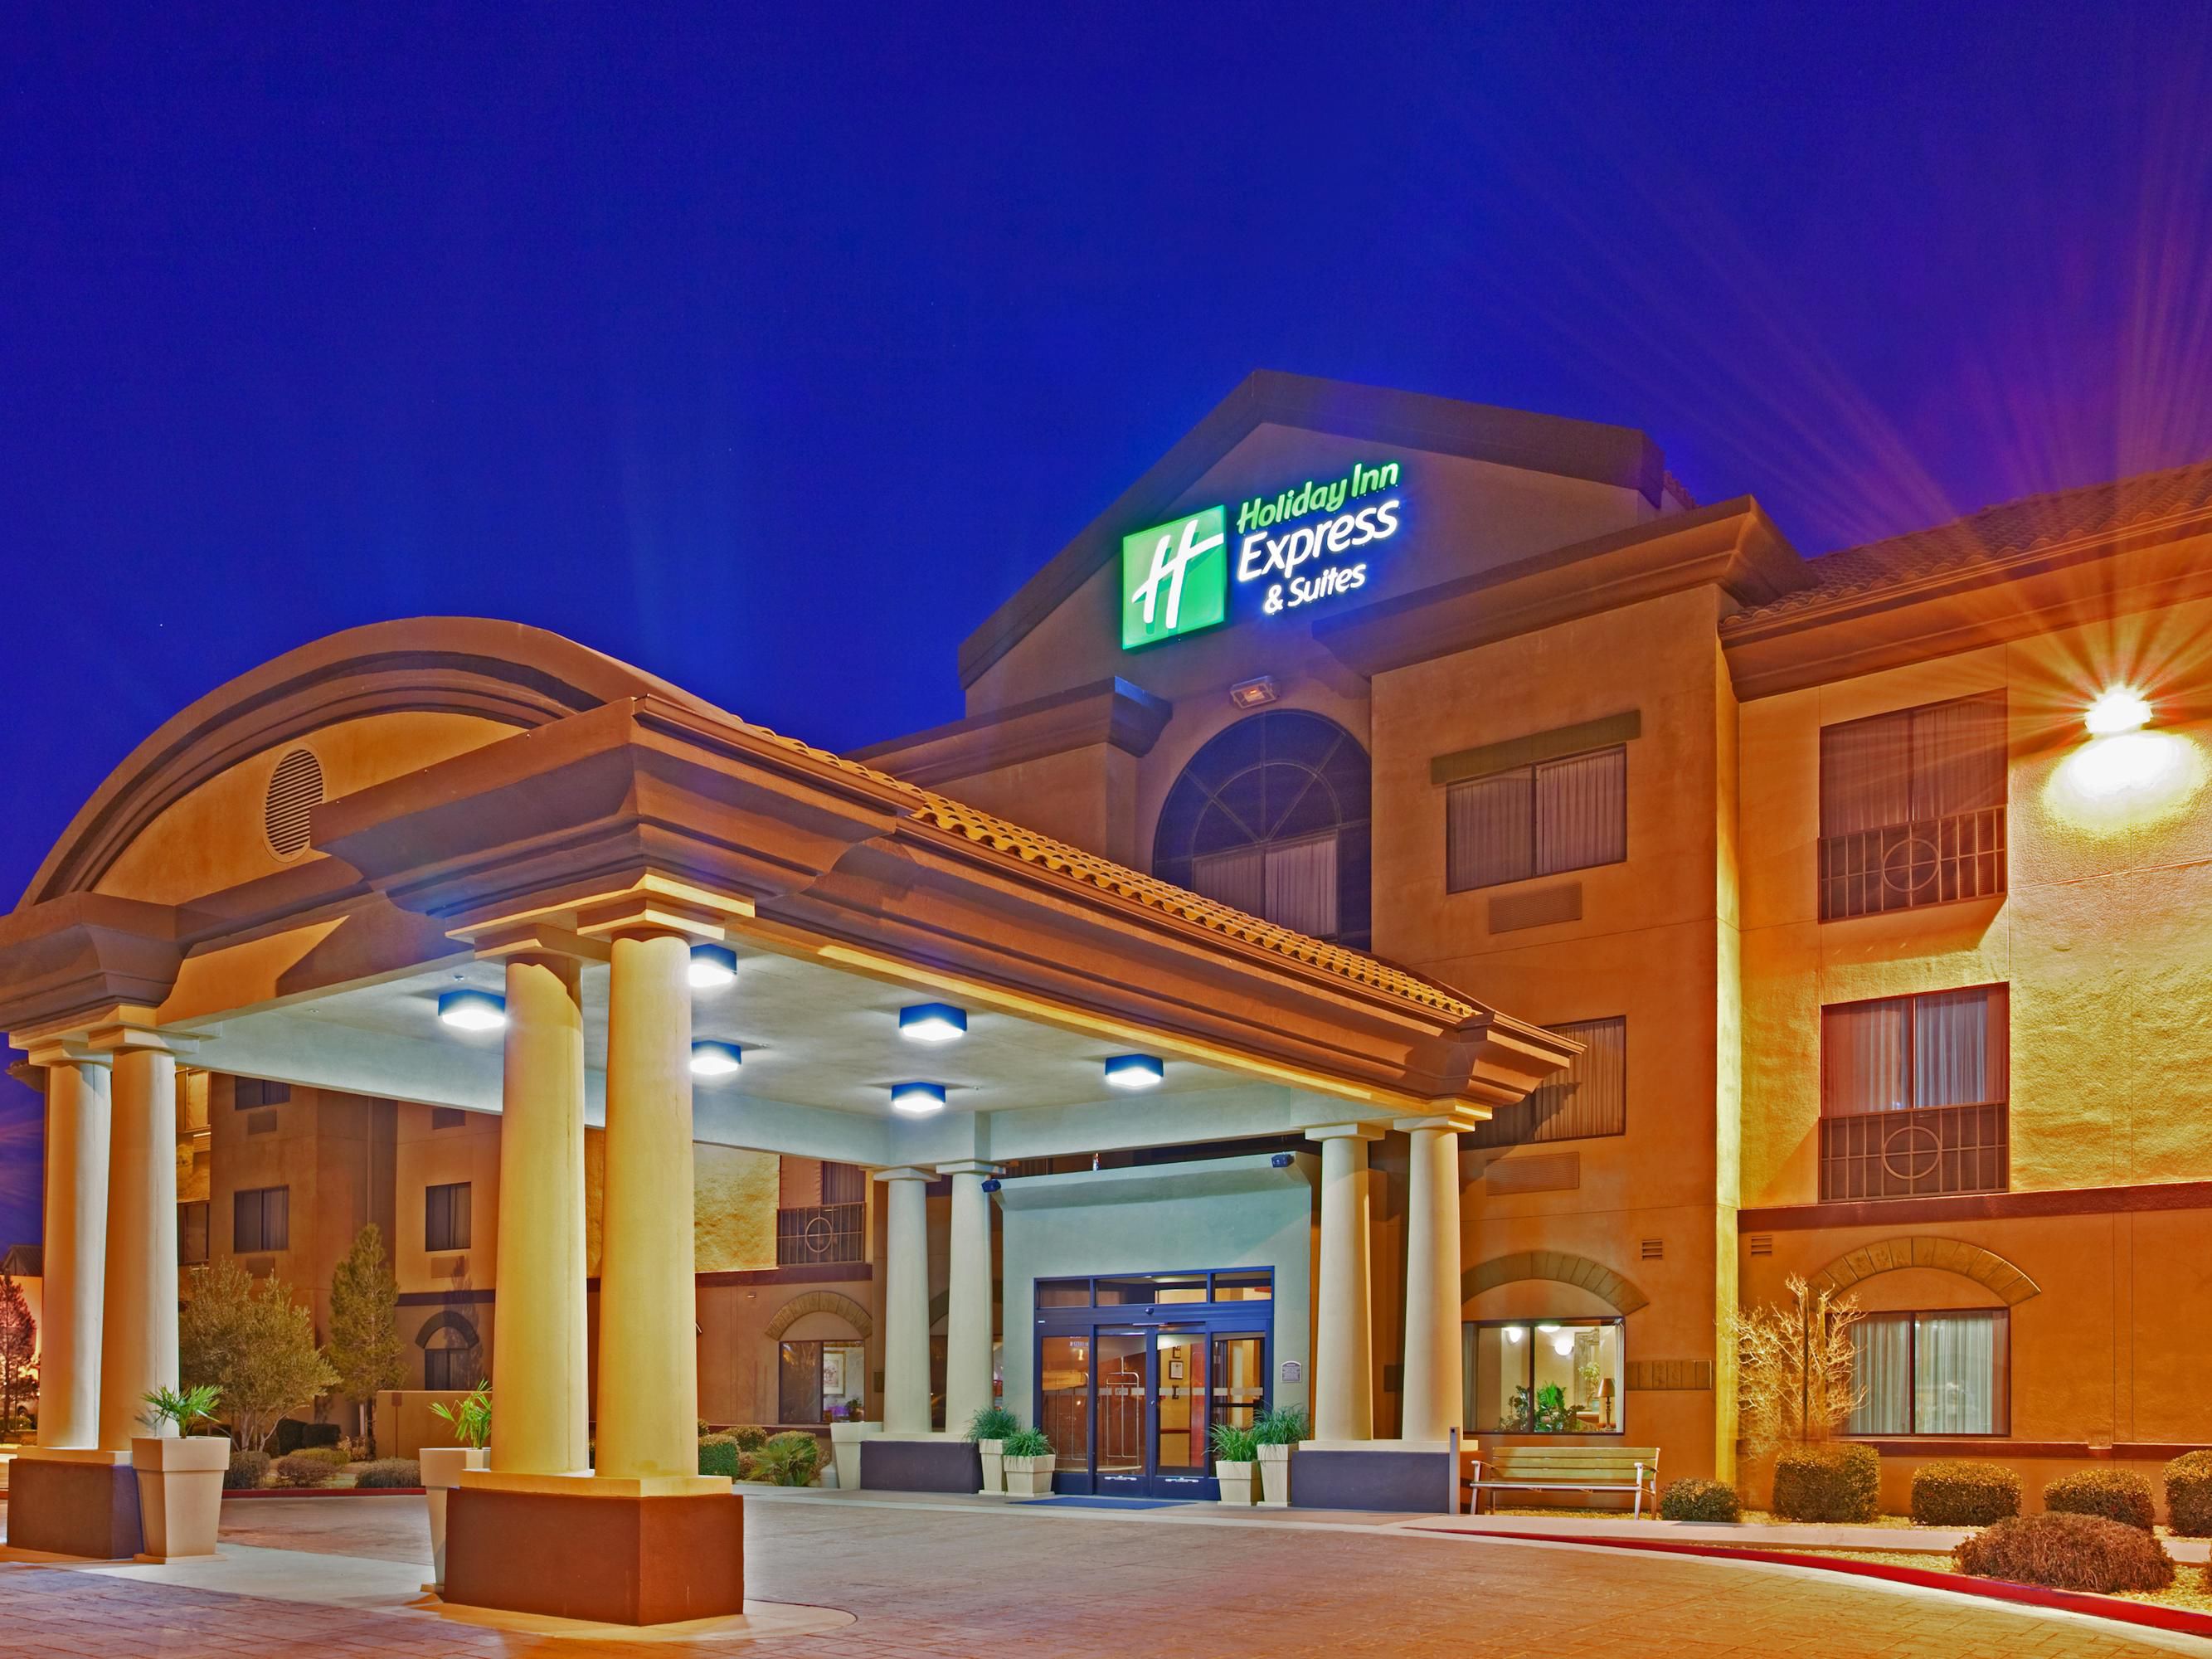 Holiday Inn Express And Suites Barstow 2532273209 4x3